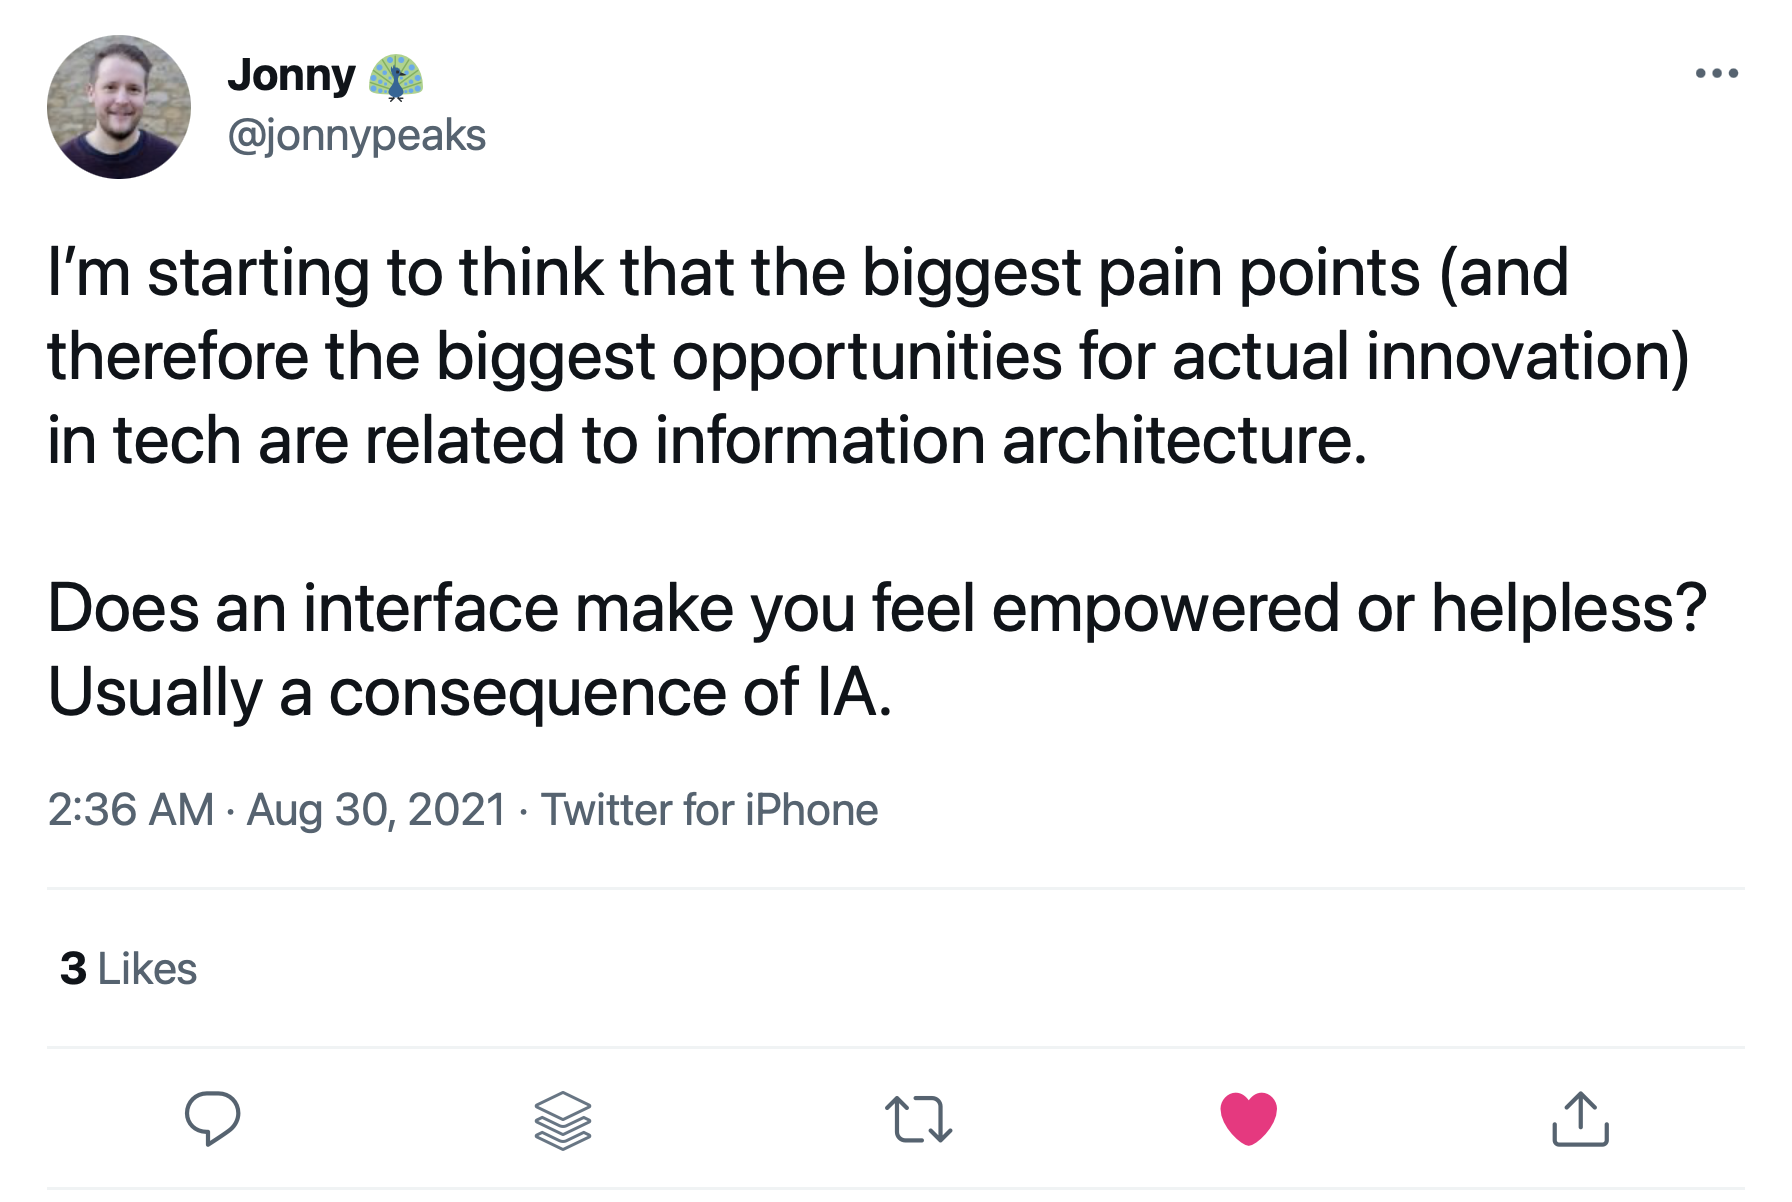 Tweet from @jonnypeaks that reads: I’m starting to think that the biggest pain points (and therefore the biggest opportunities for actual innovation) in tech are related to information architecture. Does an interface make you feel empowered or helpless? Usually a consequence of IA.